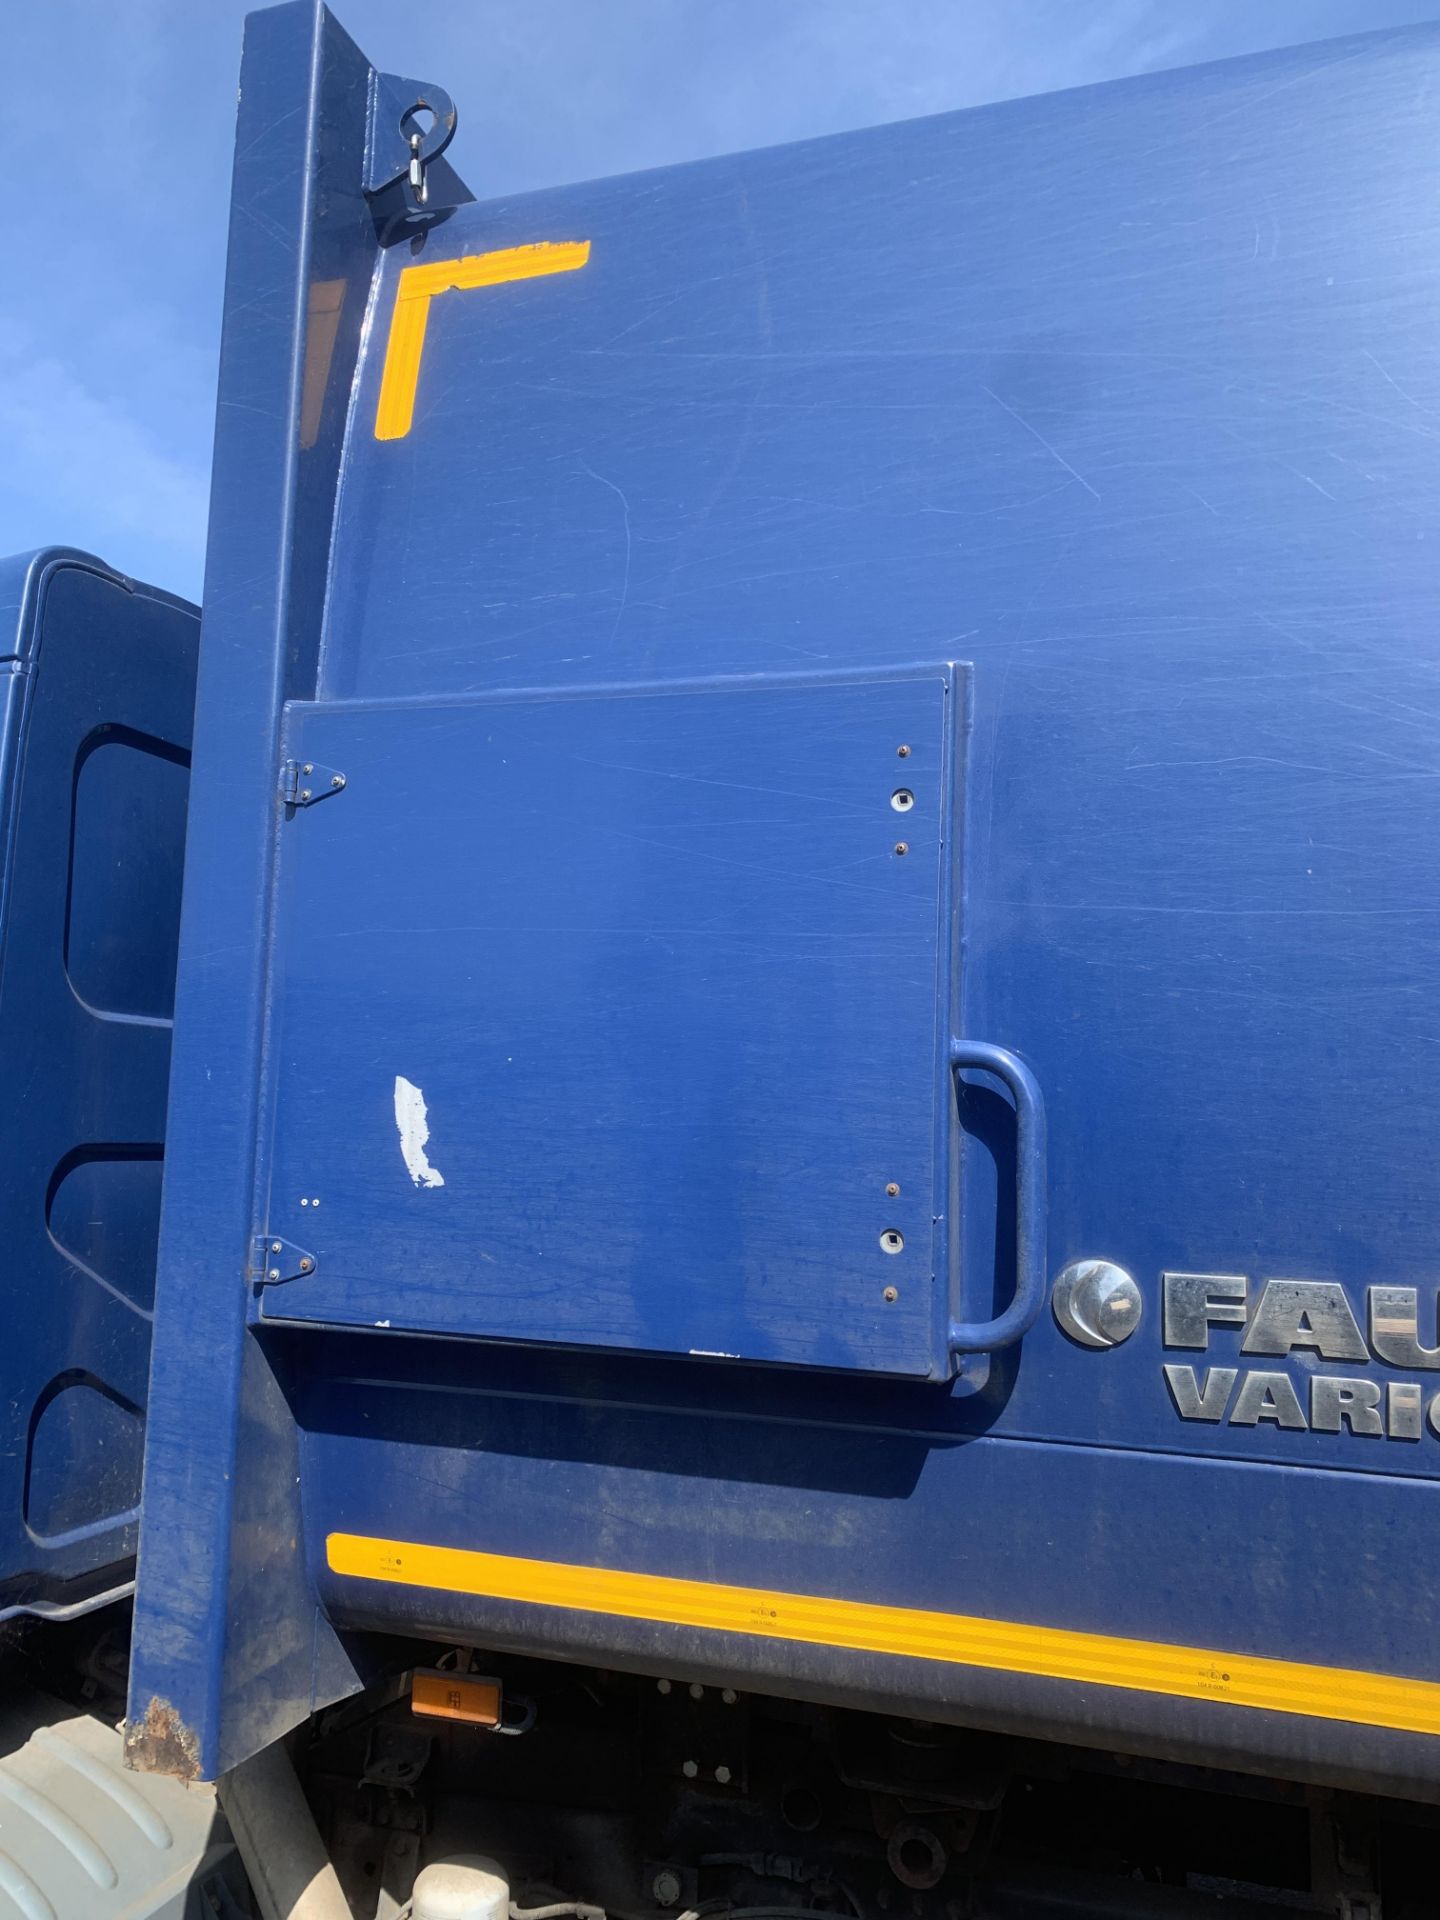 2013 BLUE DAF TRUCKS LF REFUSE COLLECTION VEHICLE - Image 10 of 12